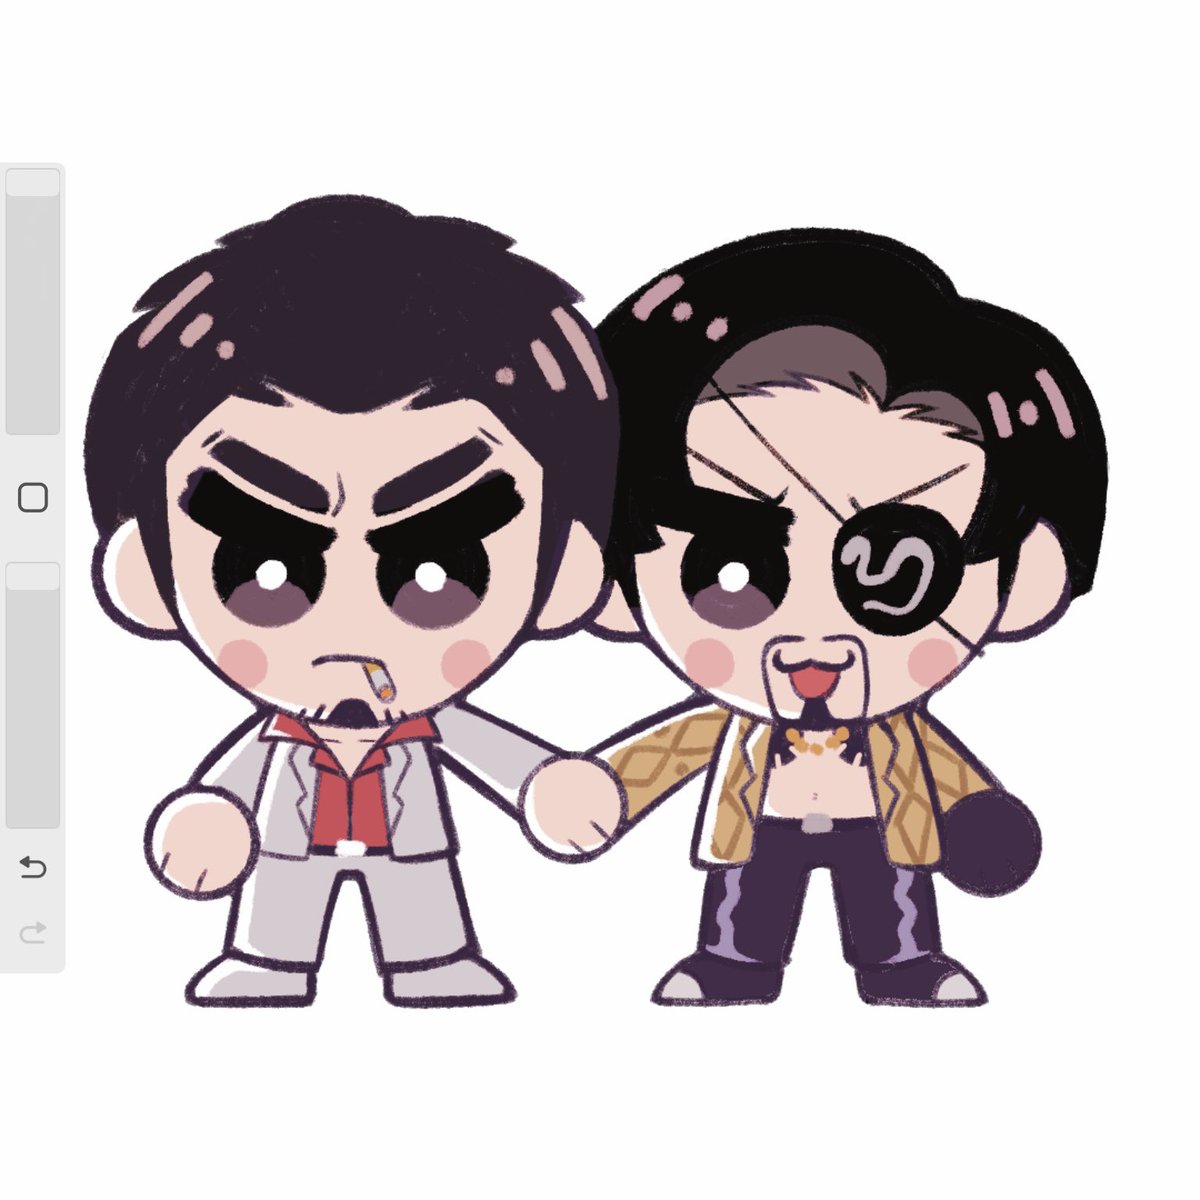 Some freebie stickers im sending off with my etsy charms heheheheh yes i use light mode in procreate dont bully me #otasune #kazumaji